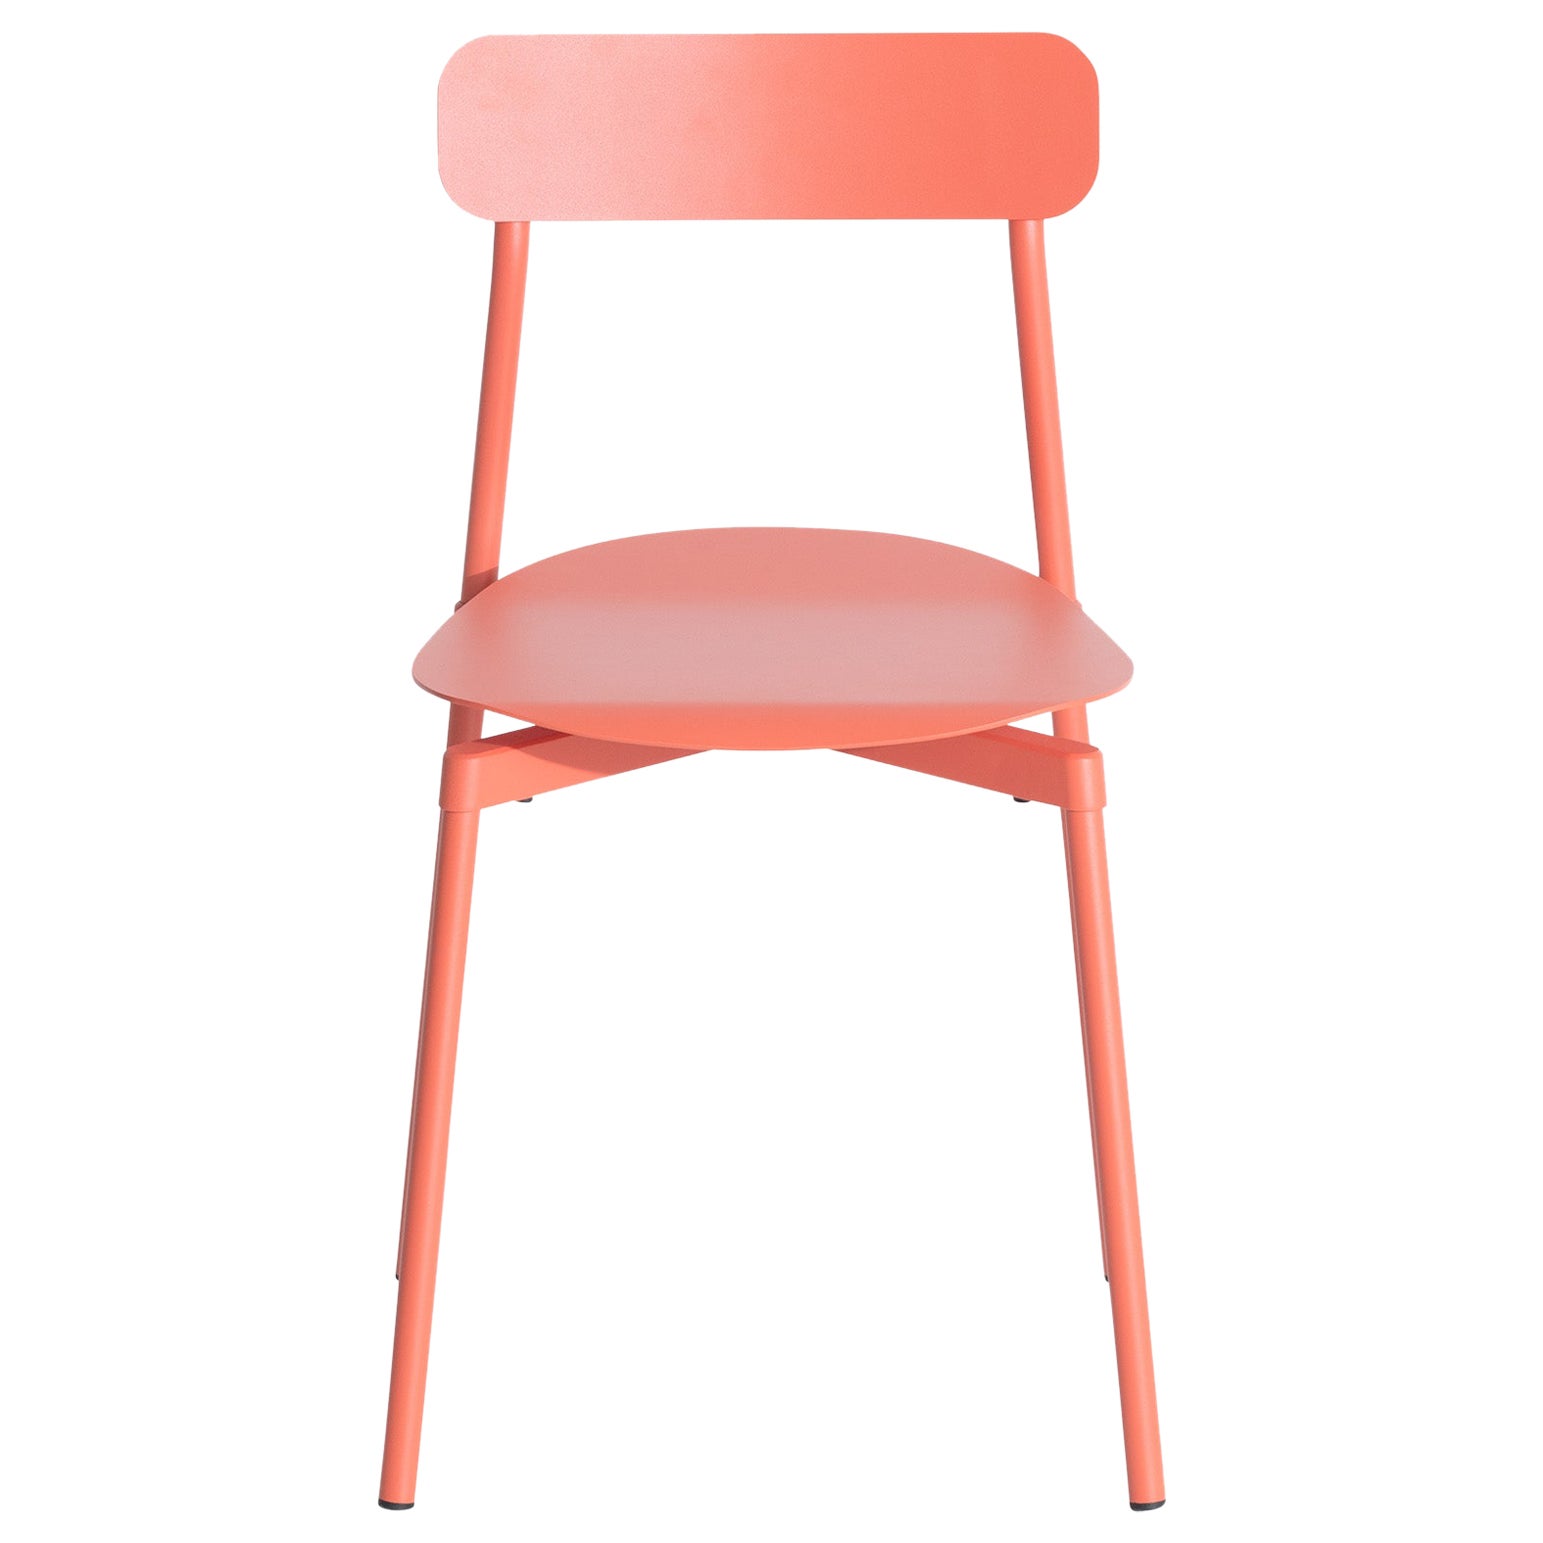 Petite Friture Fromme Chair in Coral Aluminium by Tom Chung, 2019